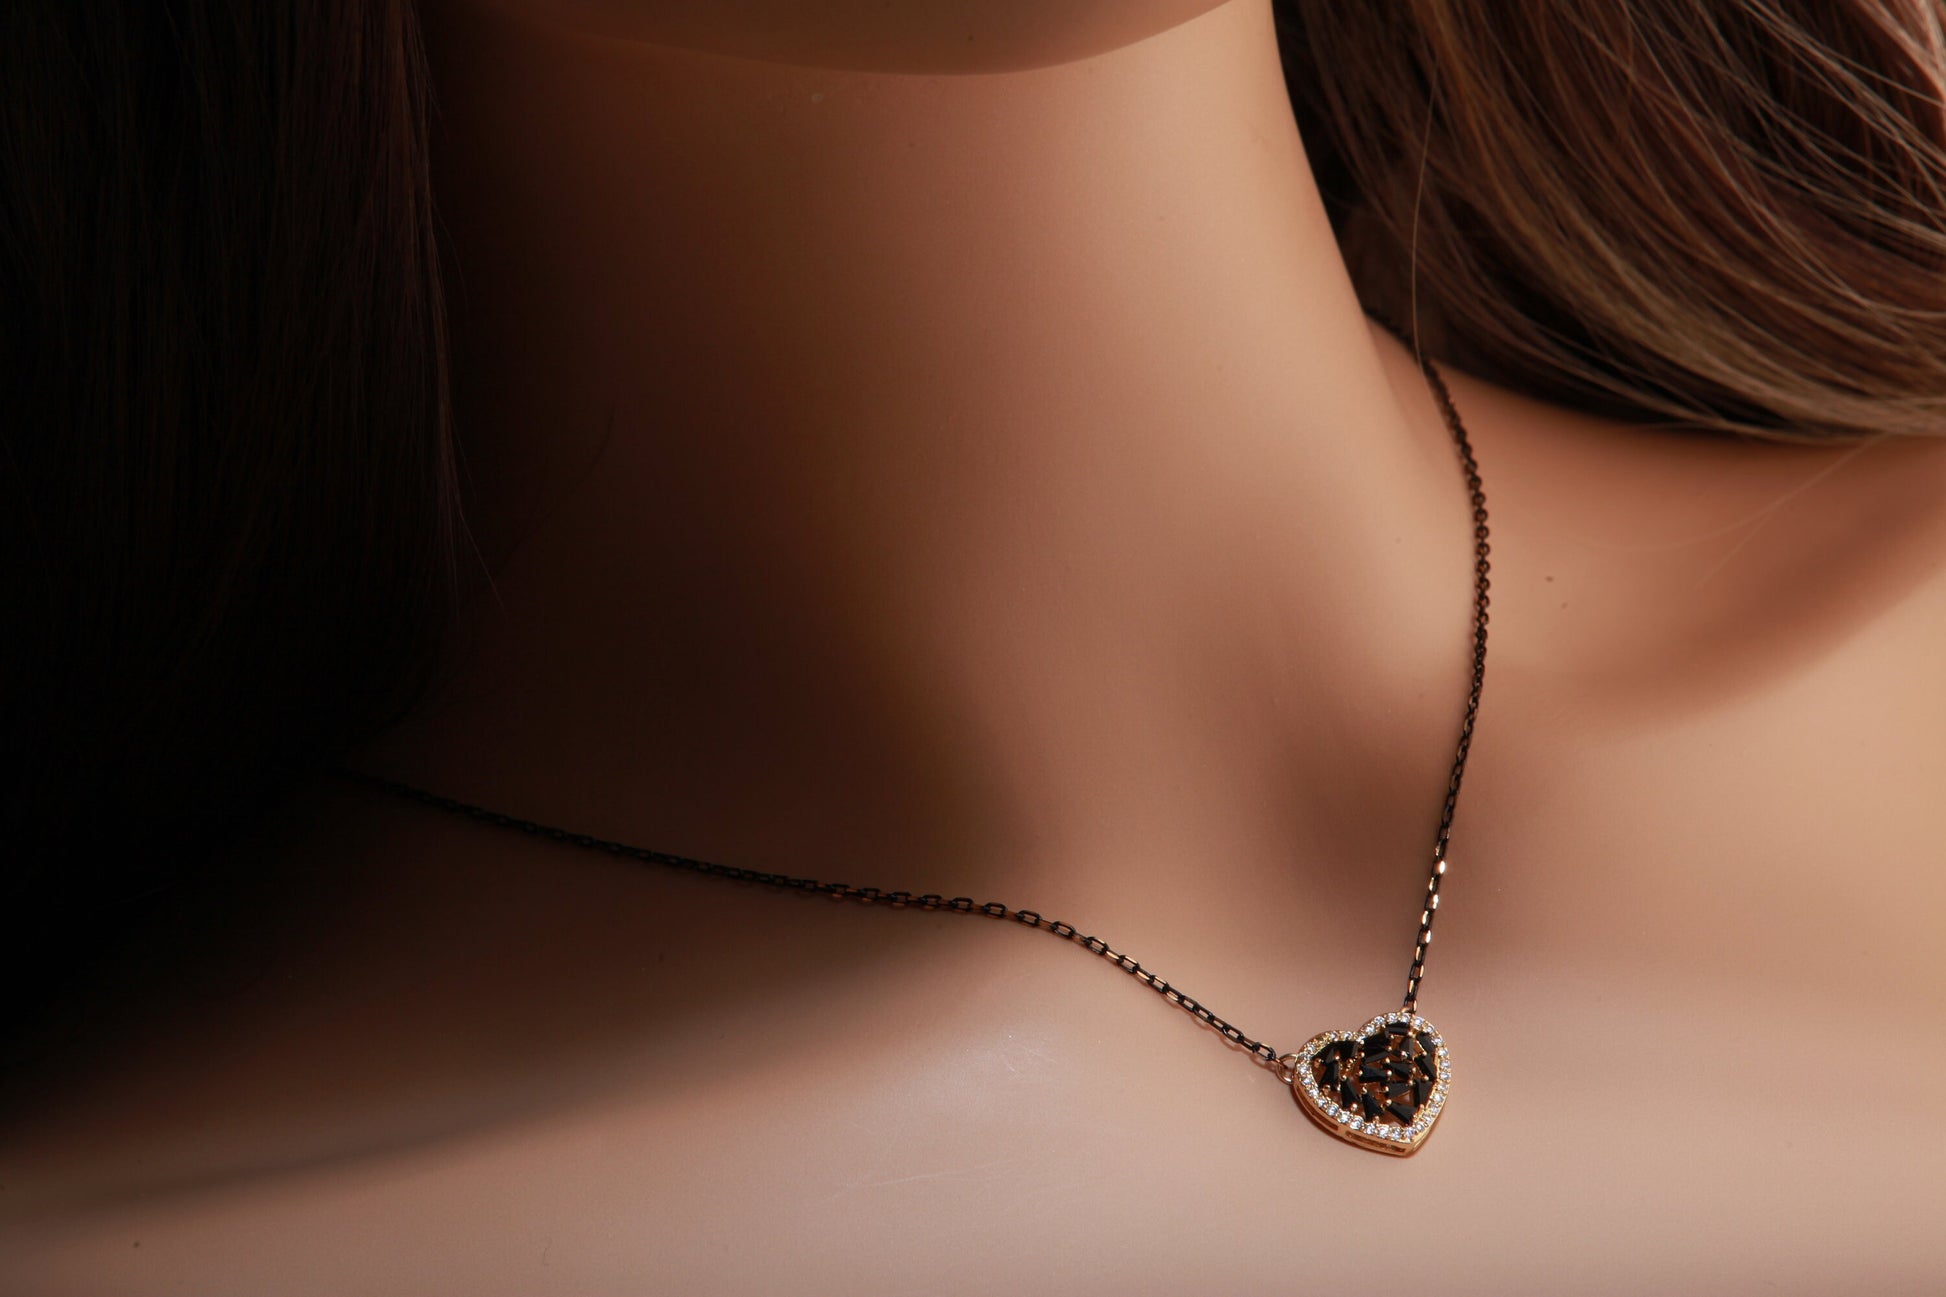 Black Spinel with Cubic Zirconia Micro Pave Heart Charm Pendant with Gold Oxidized Two Tone Necklace Available in 16",18" and 20"